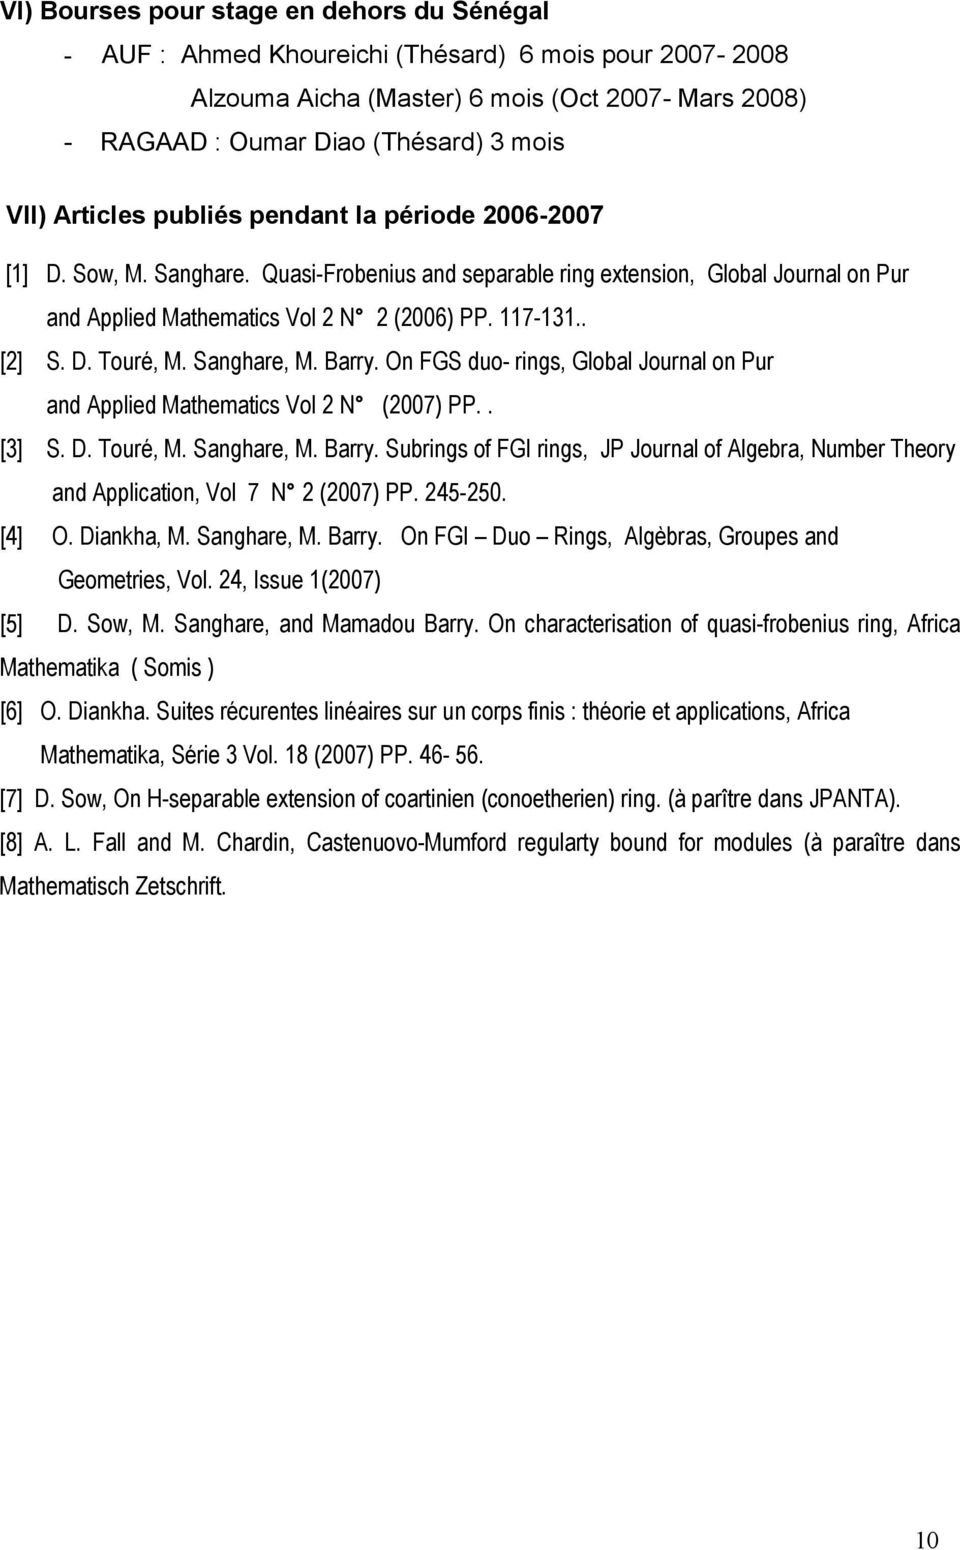 D. Touré, M. Sanghare, M. Barry. On FGS duo- rings, Global Journal on Pur and Applied Mathematics Vol 2 N (2007) PP.. [3] S. D. Touré, M. Sanghare, M. Barry. Subrings of FGI rings, JP Journal of Algebra, Number Theory and Application, Vol 7 N 2 (2007) PP.